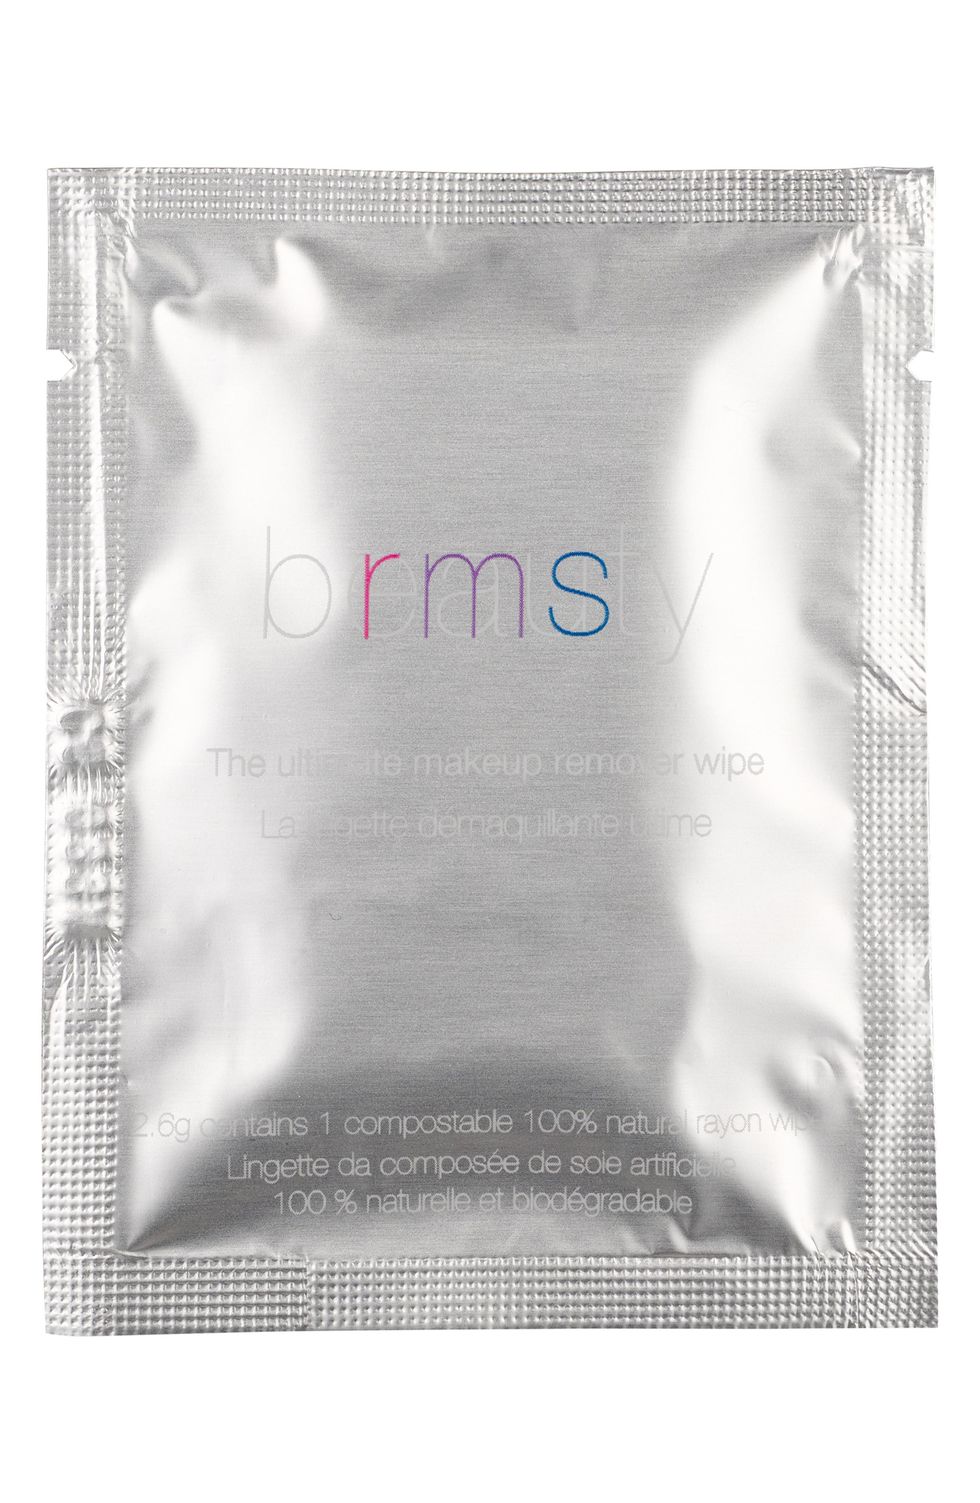 RMS Beauty Ultimate Makeup Remover Wipes at Nordstrom